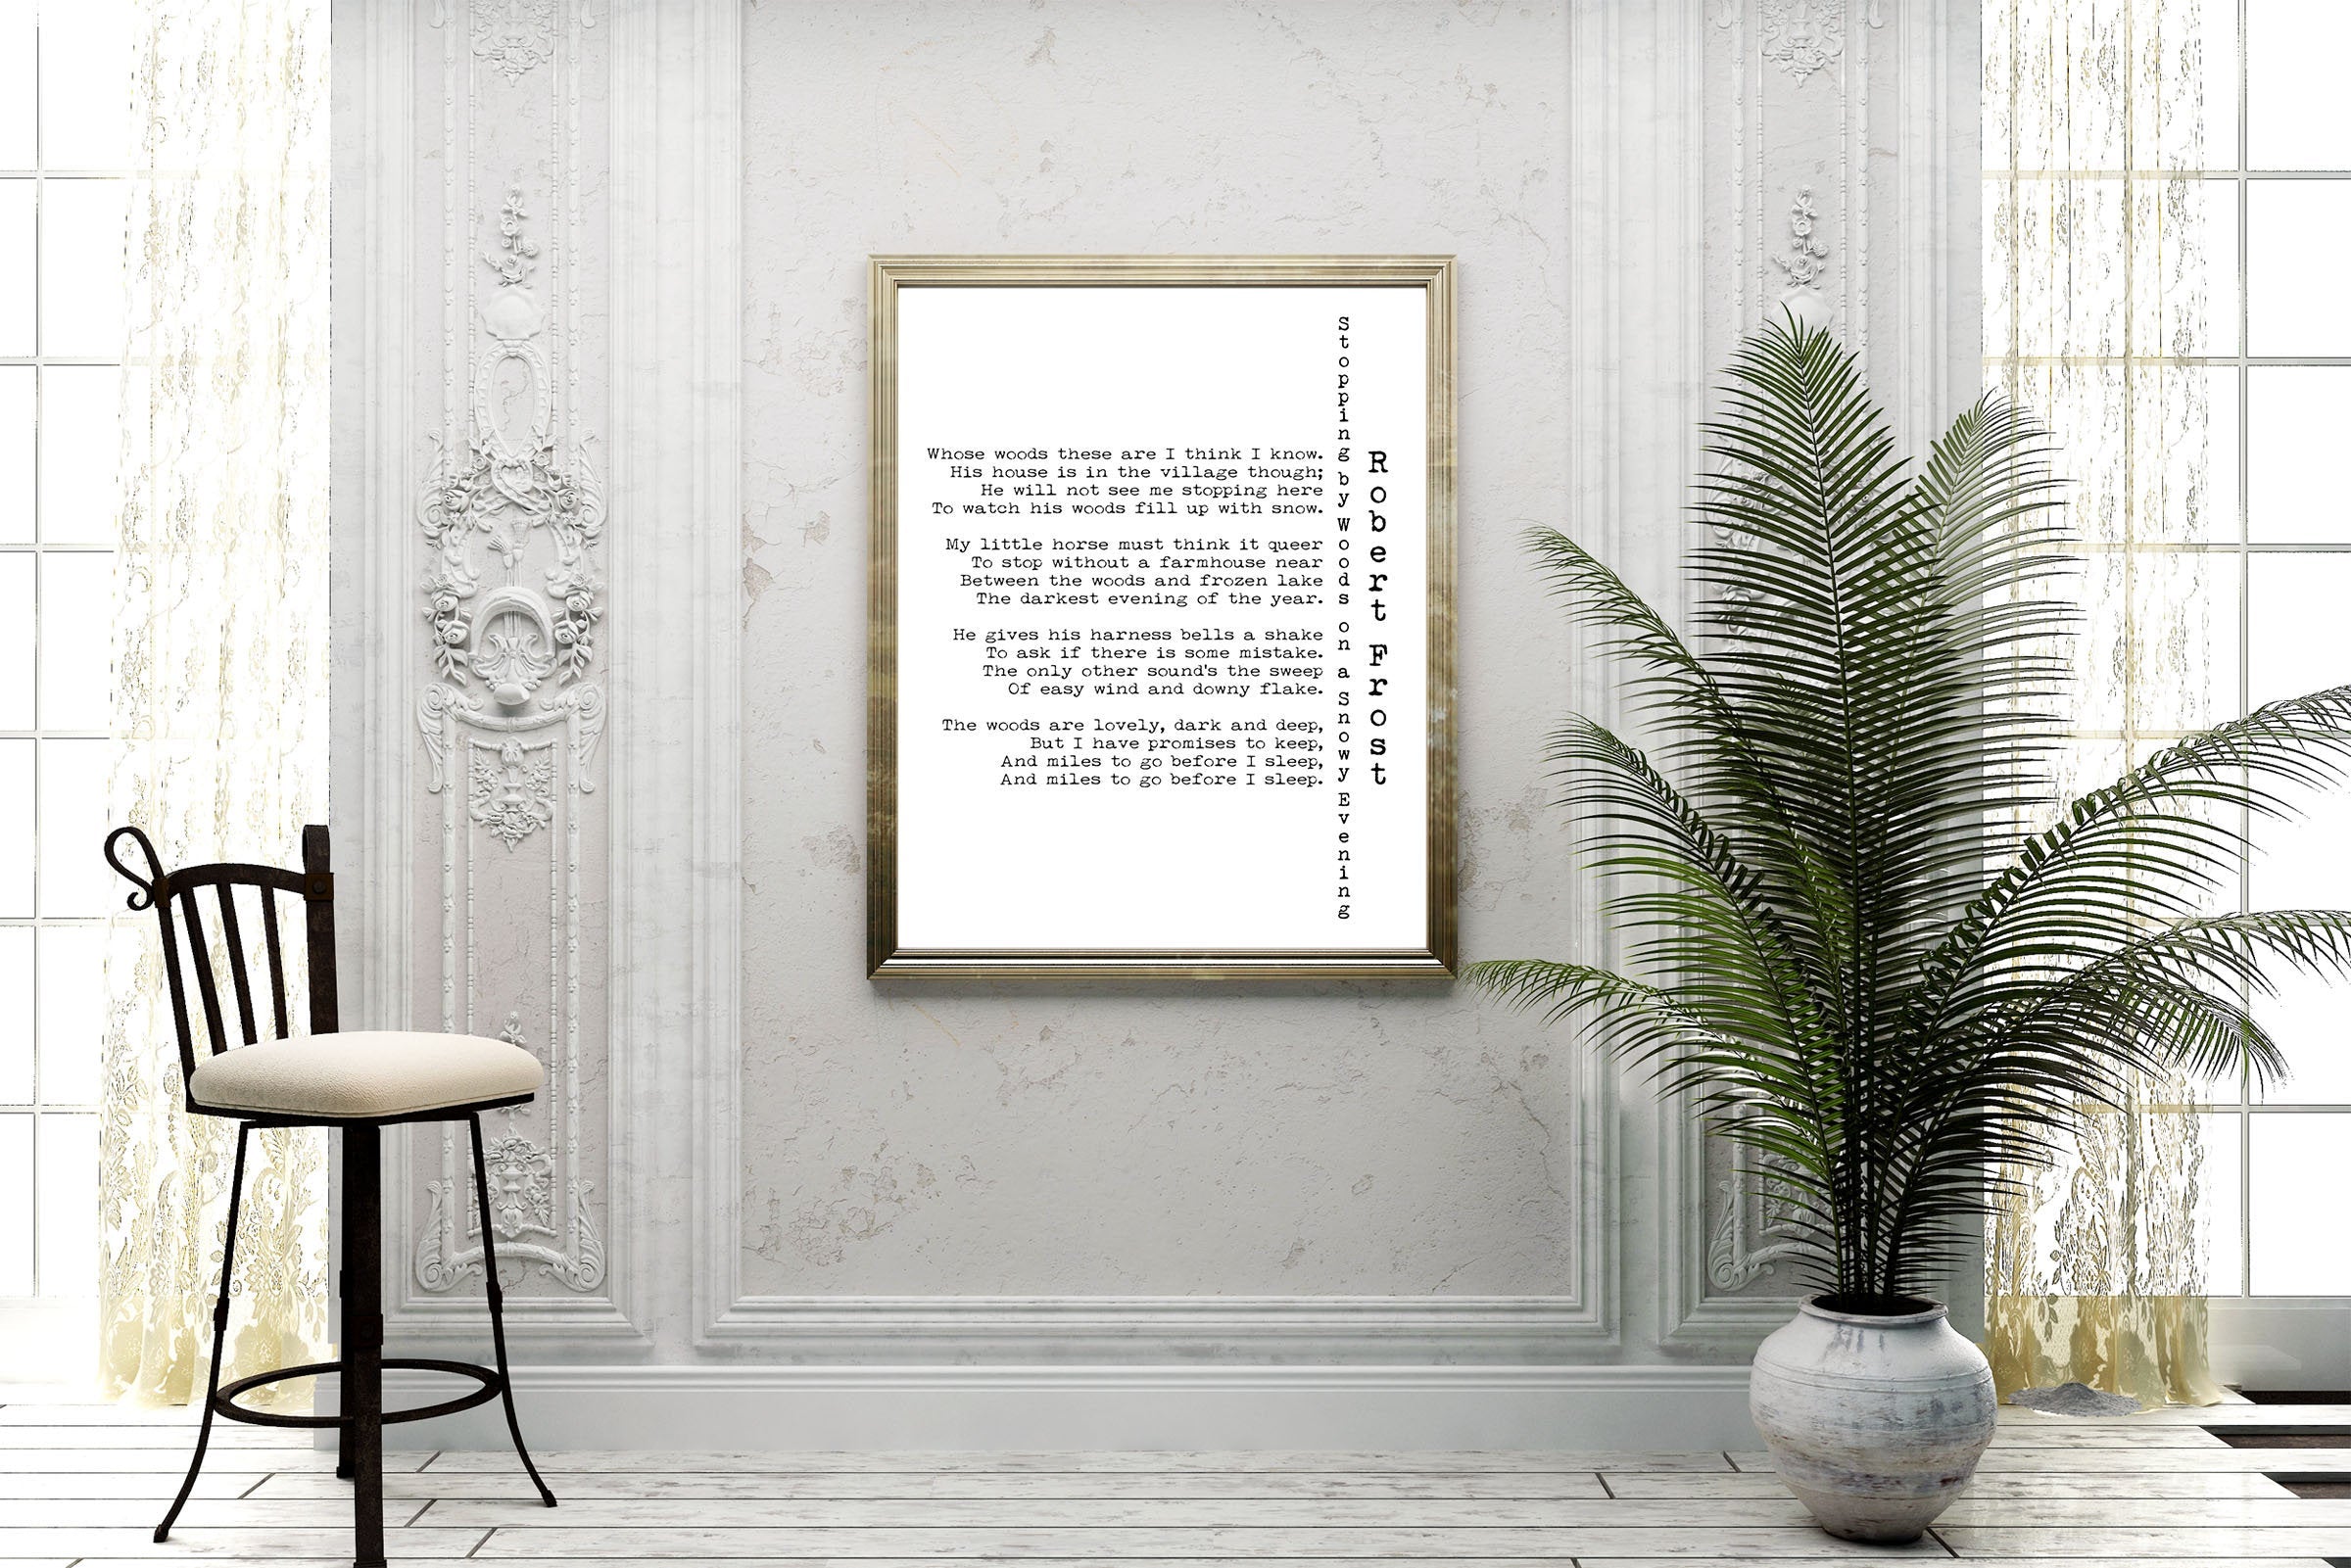 Robert Frost Poem Print, Miles to go Before I sleep Poetry Poster Unframed in Black & White for Home Wall Decor, Woods on a Snowy Evening - BookQuoteDecor